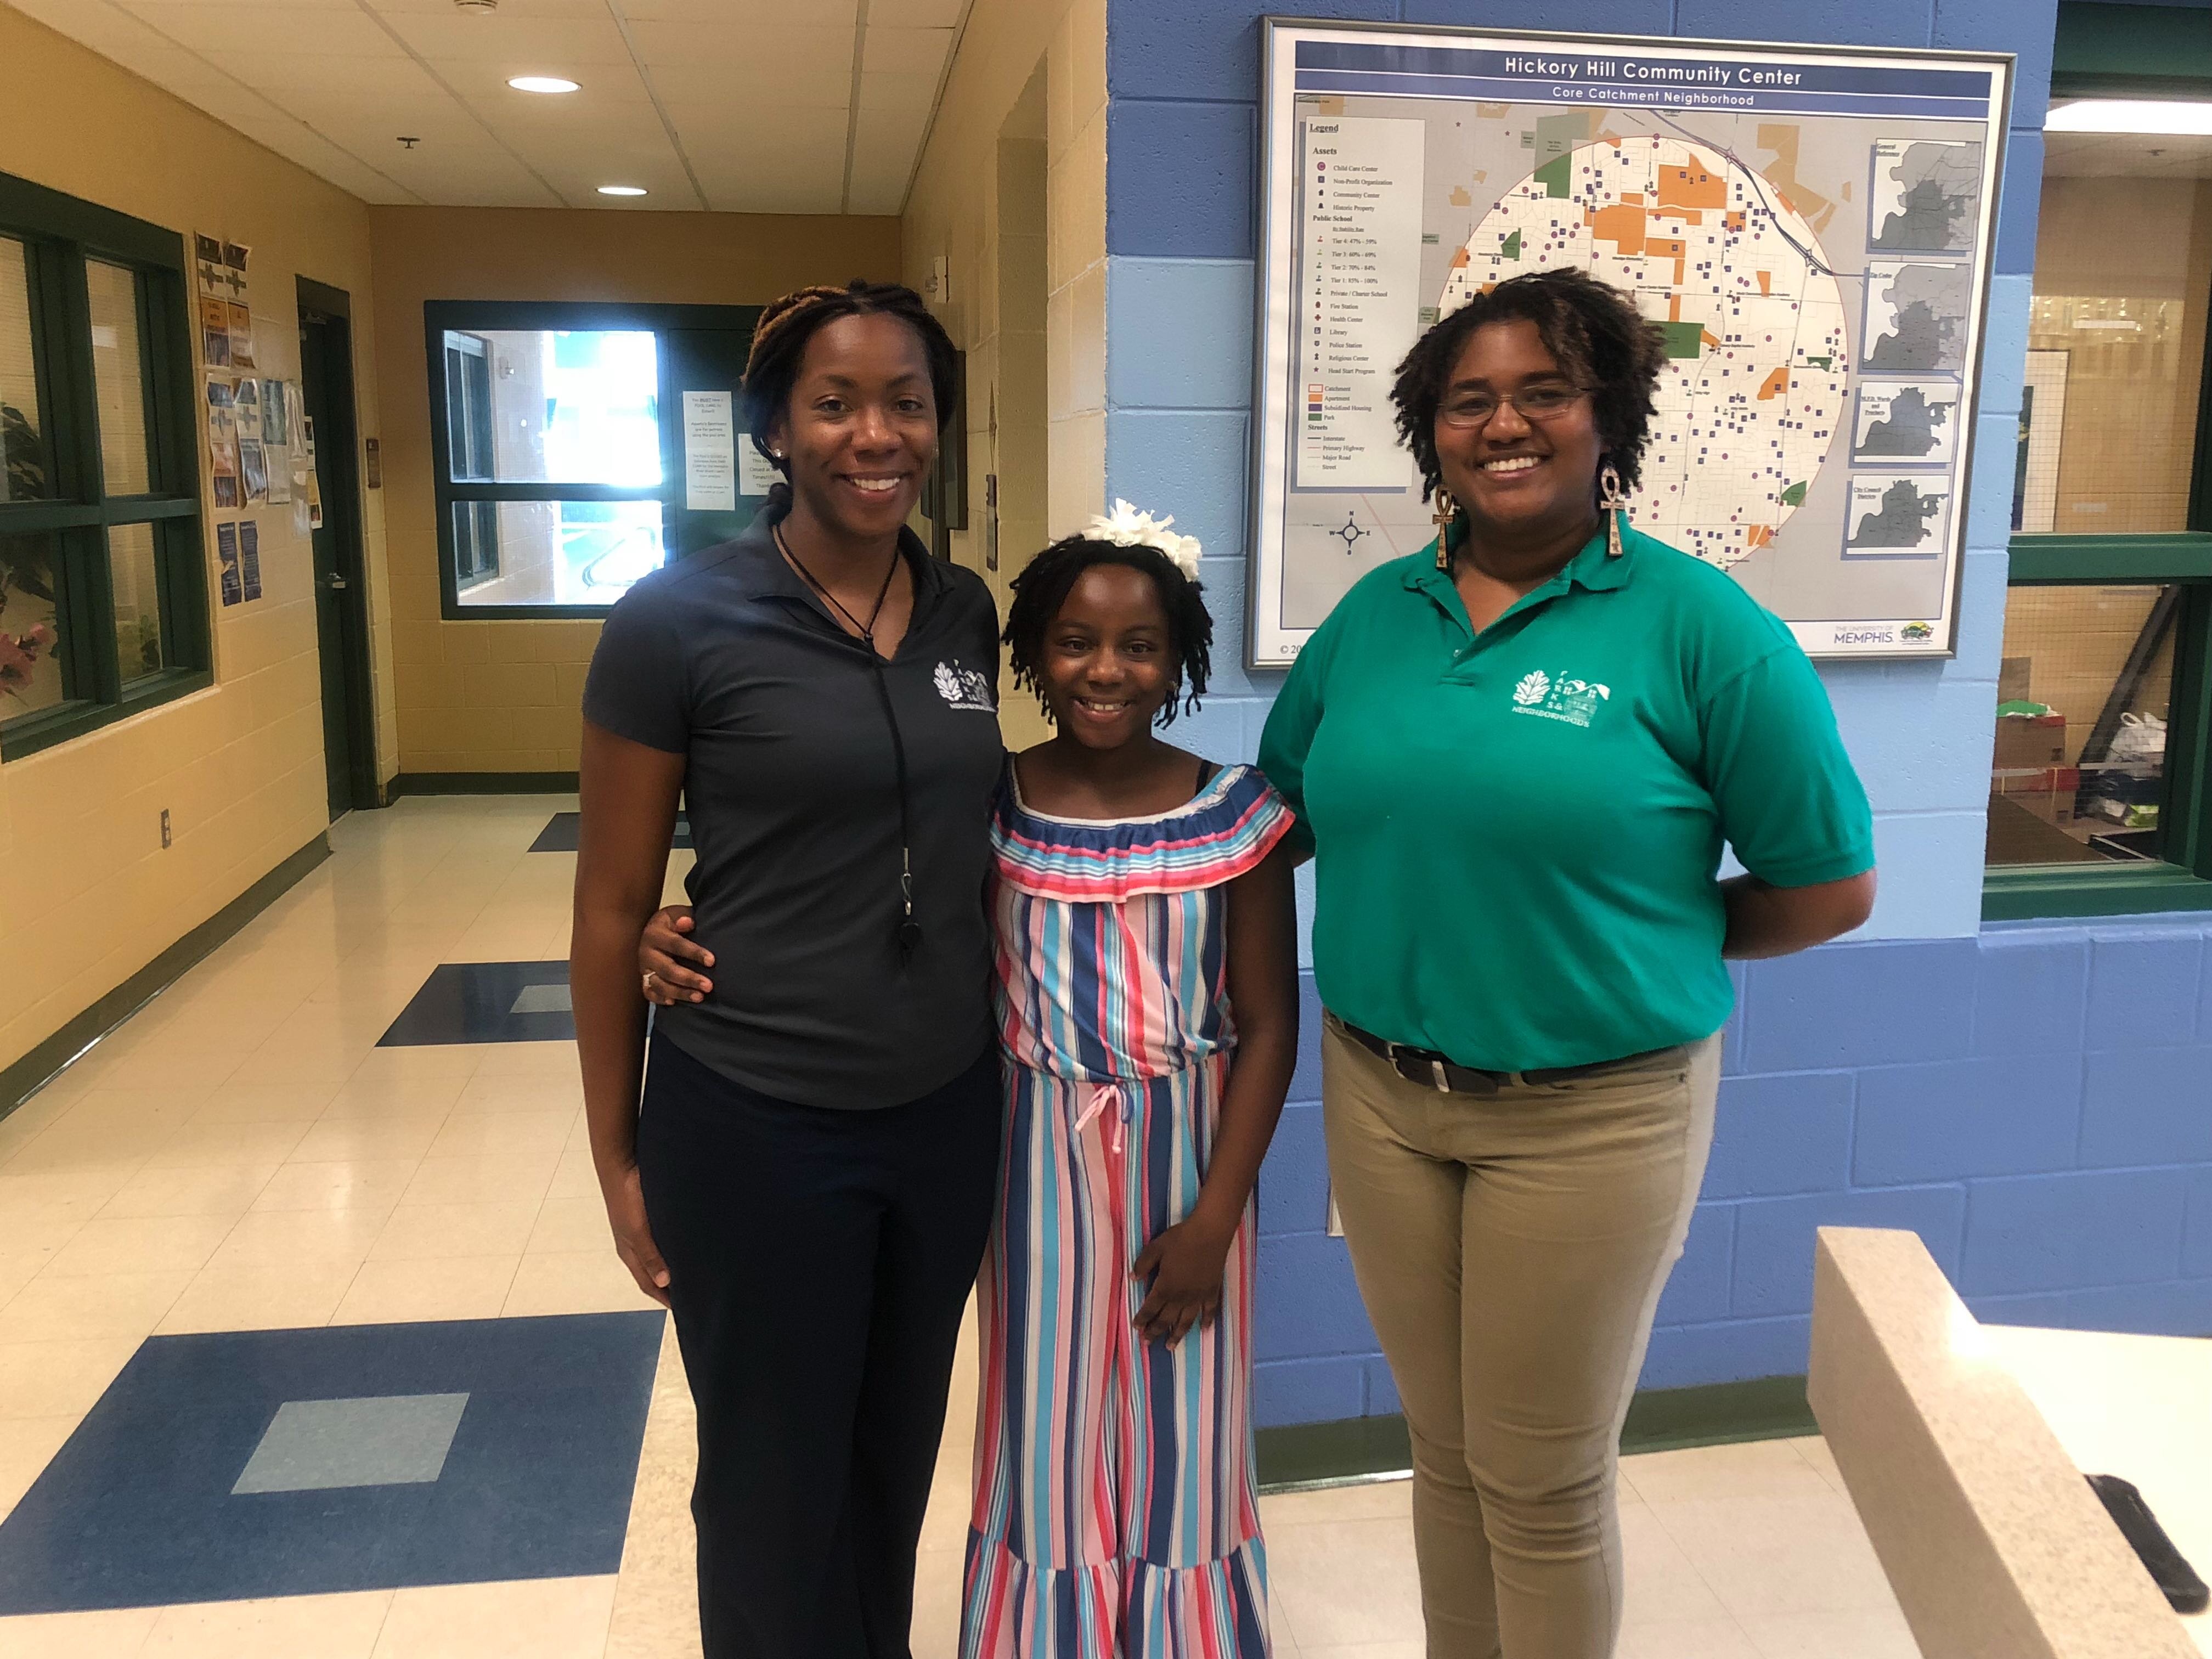 (L to R) Hickory Hill Community Center's assistant director, Danae Lawrence, her daughter and center volunteer, Mya Brady, and center director, Adrianna Moore pose in the center's lobby. (A.J. Dugger III)